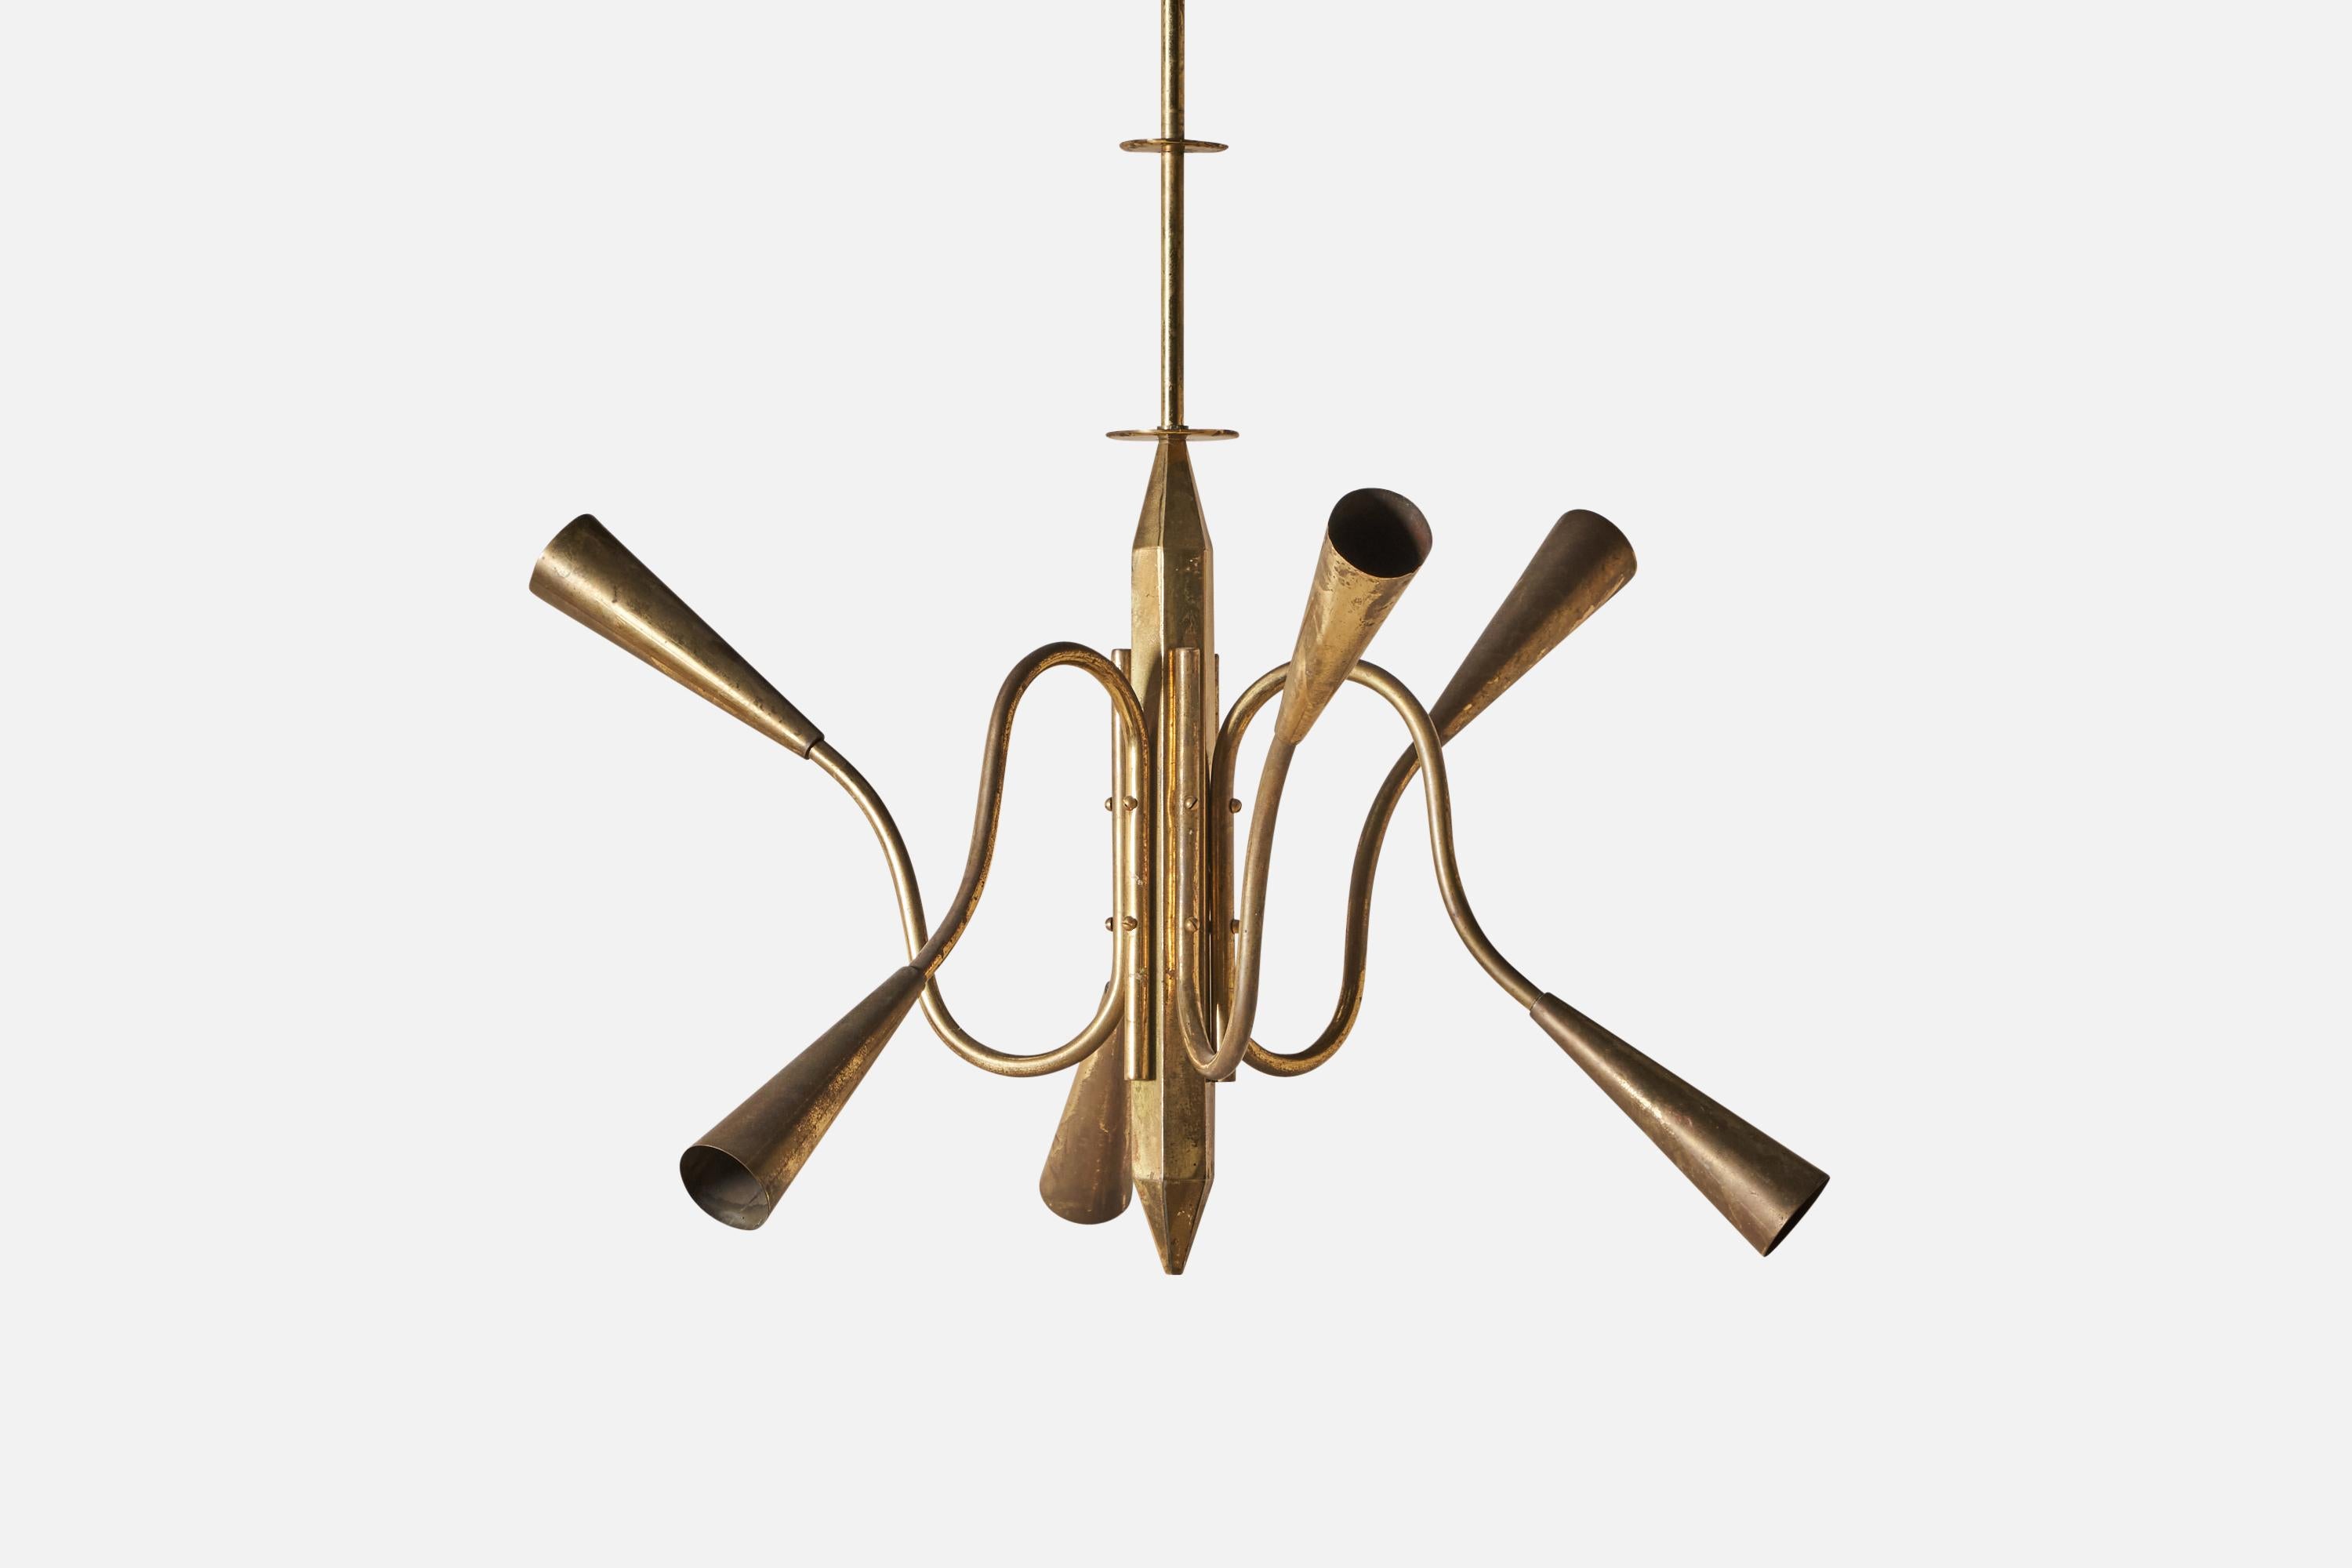 A six-armed brass chandelier designed and produced in Italy, 1940s.

Overall Dimensions (inches): 41” H x 30” Diameter
Bulb Specifications: E-14 Bulb
Number of Sockets: 6